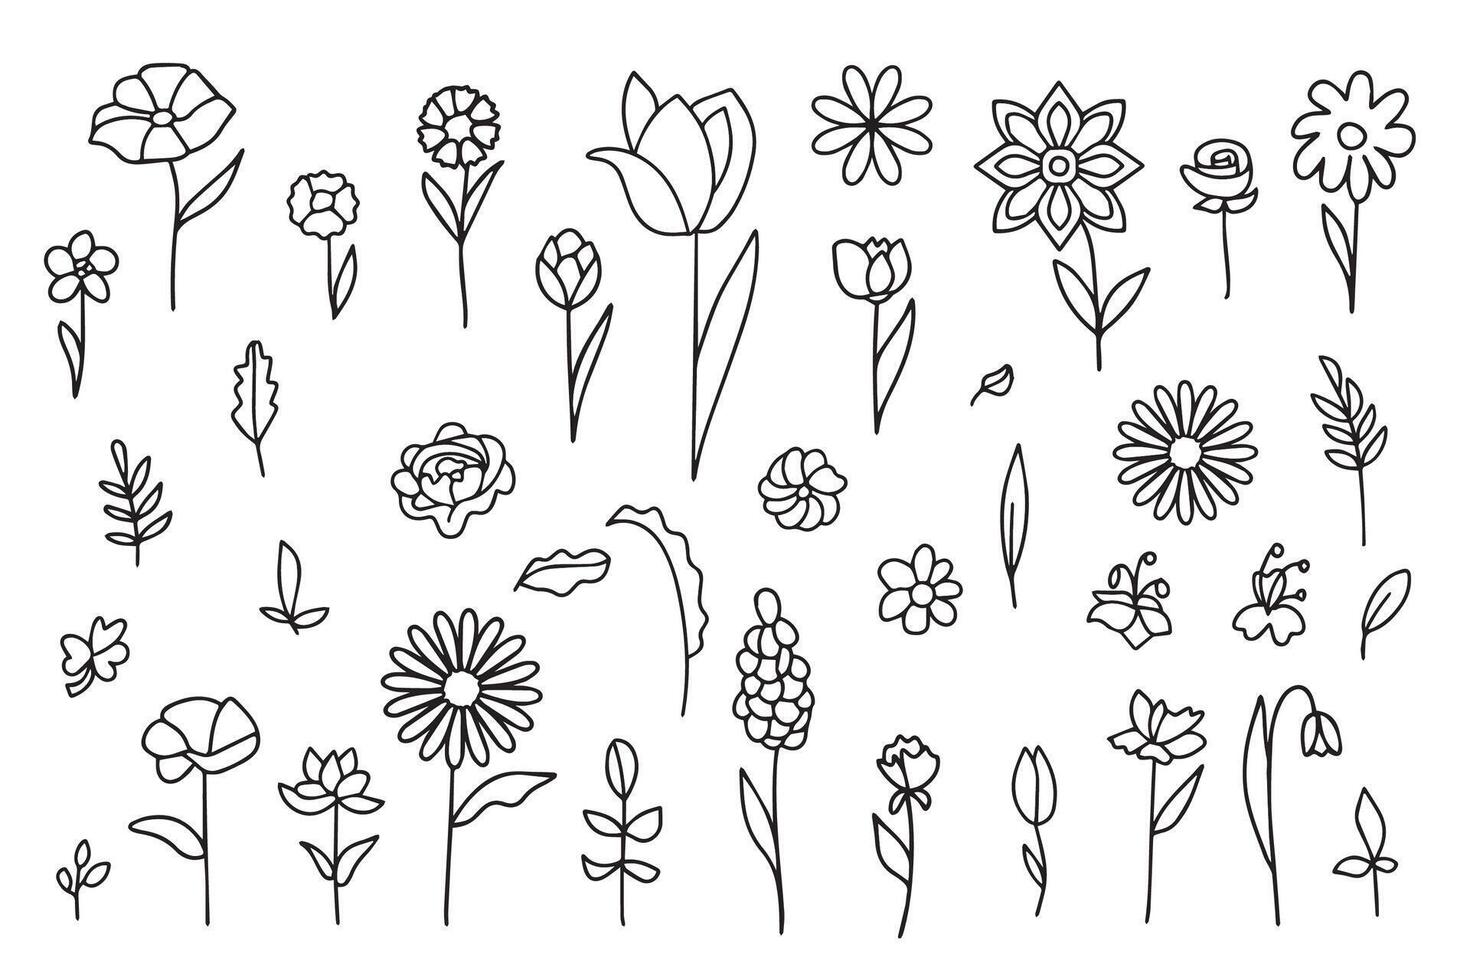 Set of simple flower and plant elements in doodle style. Stylized flowers, plant branches, leaves. Hand drawn simple icons. Symbol of gardening, the arrival of spring, summer. vector